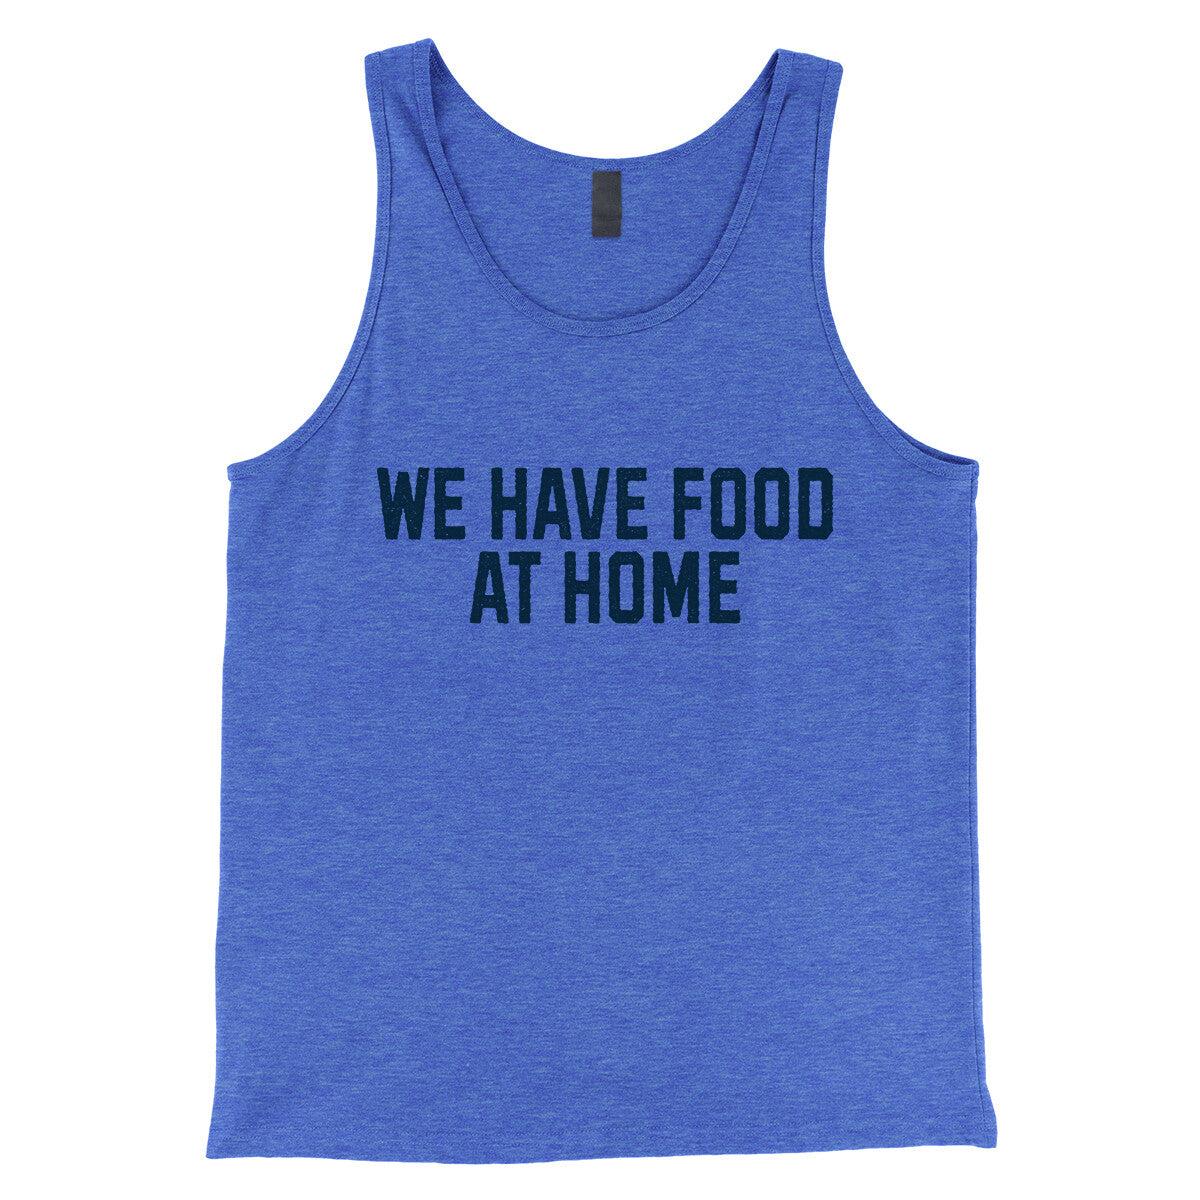 We Have Food at Home in True Royal TriBlend Color